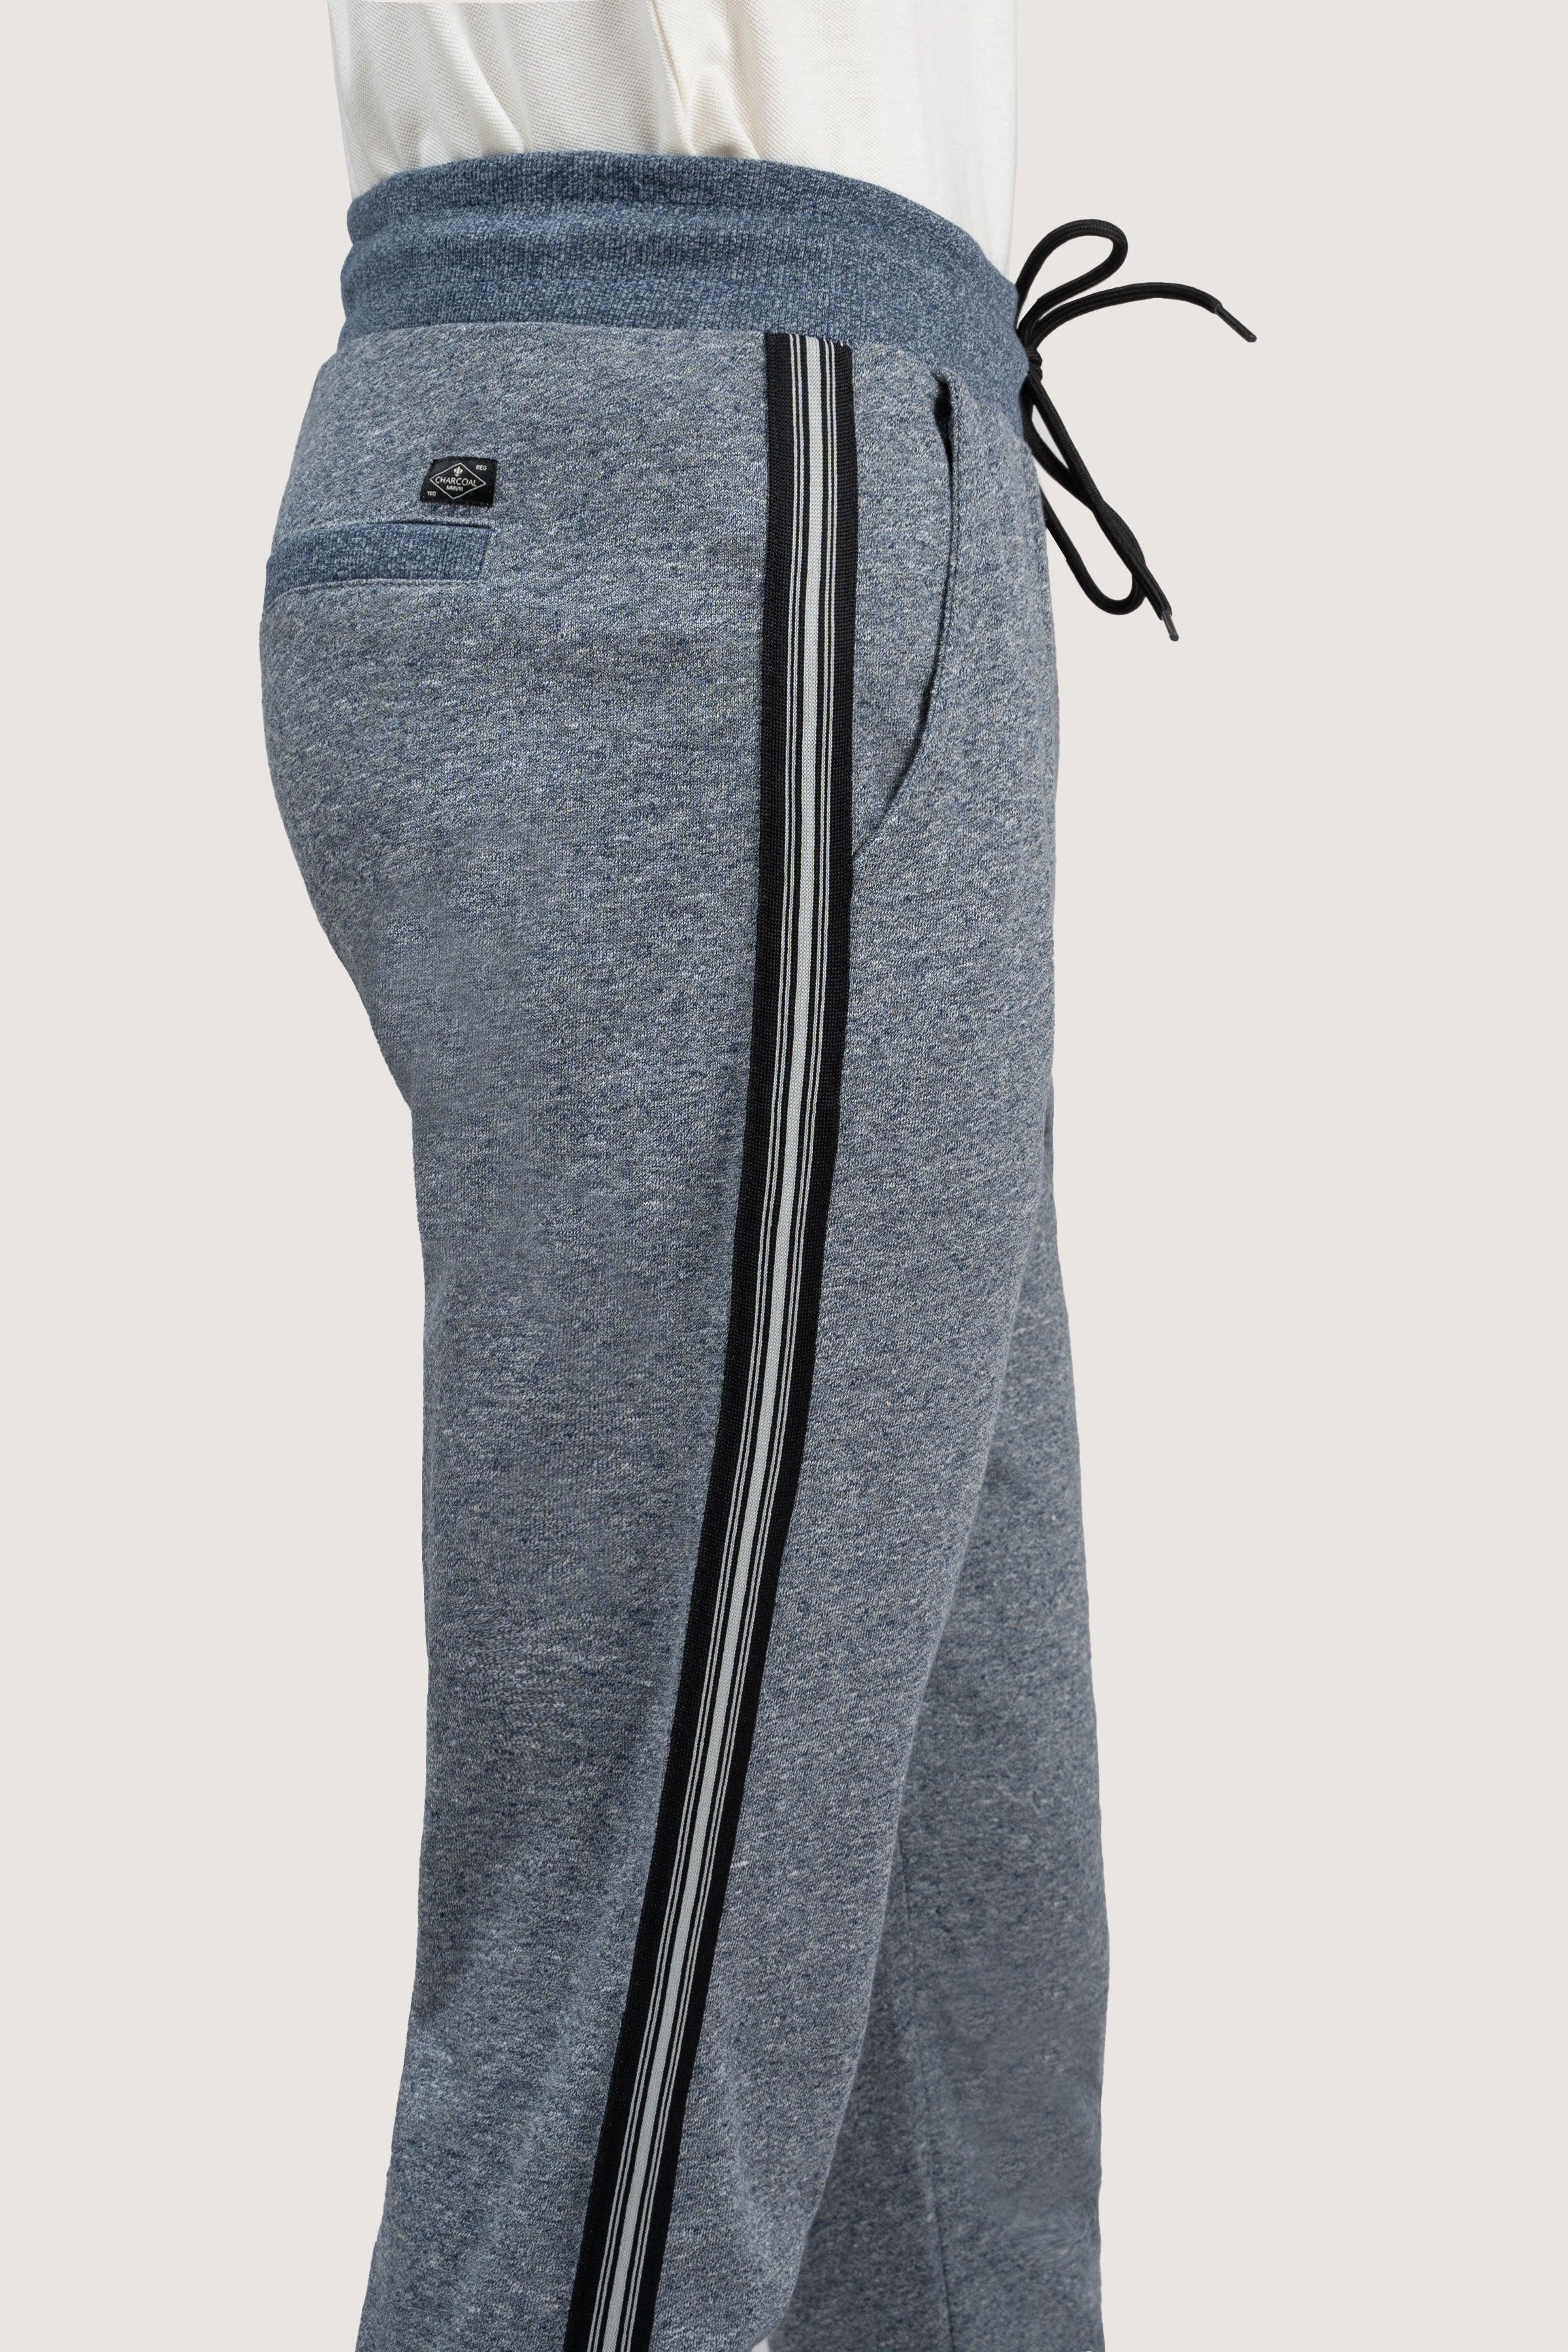 CHAIN YARN SLIMFIT JOGGER TROUSER NAVY MELANGE at Charcoal Clothing